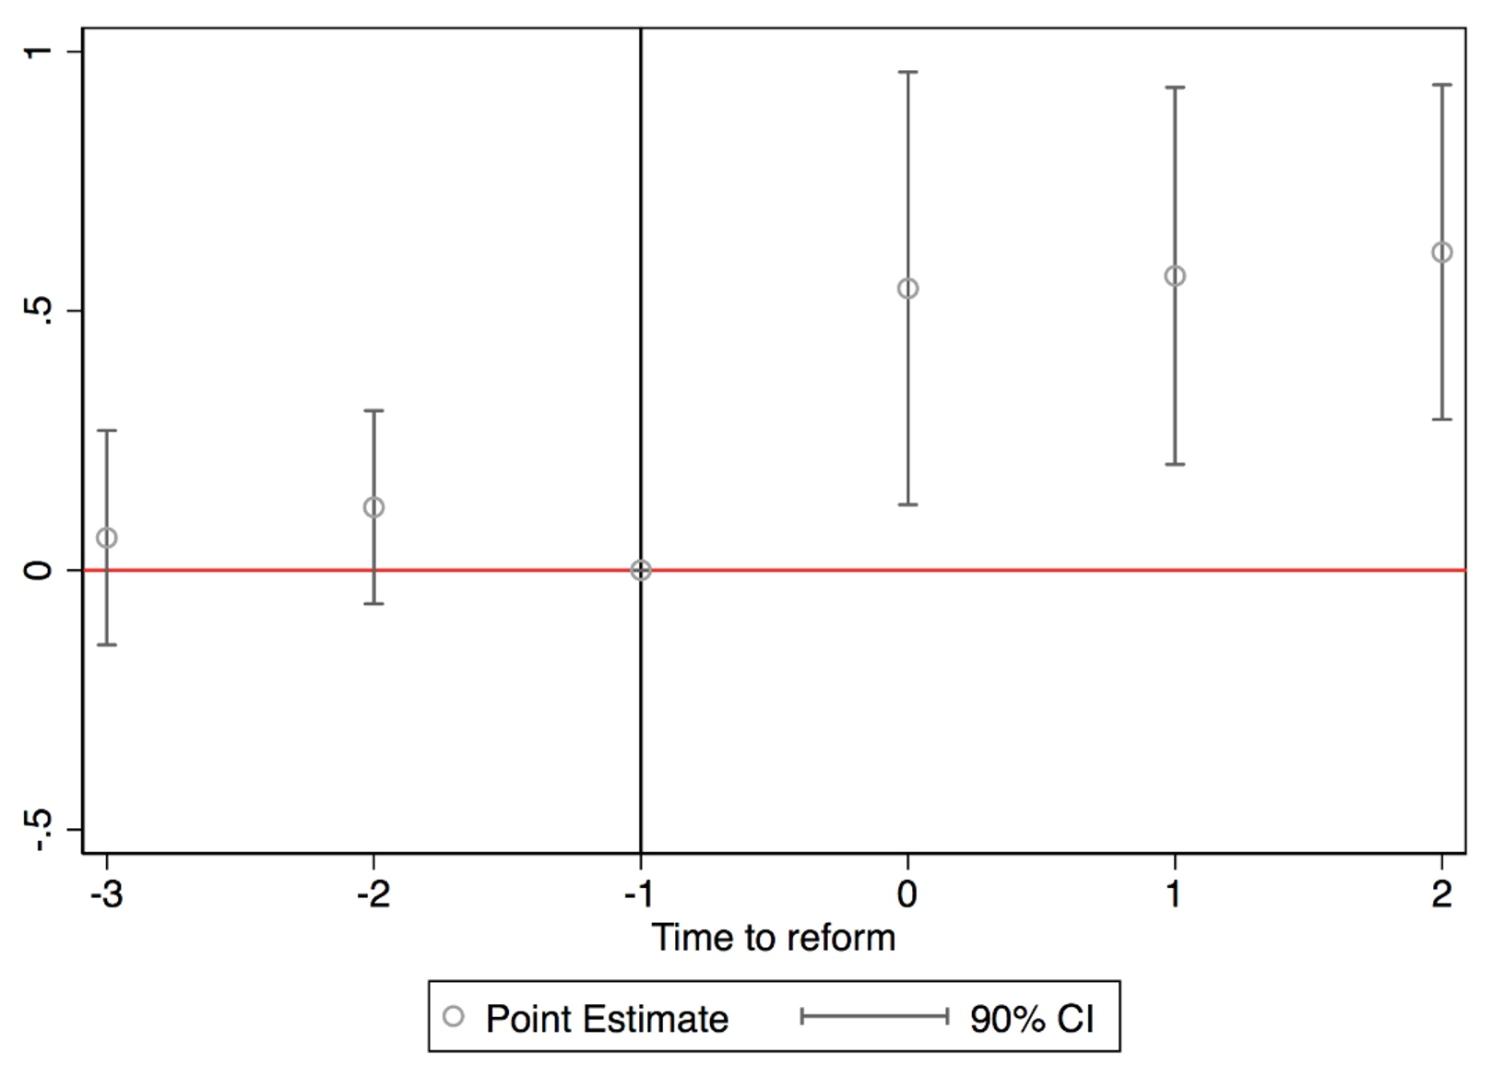 Figure 2 The impact of product market regulation on plant-level wage markdowns in the event study design